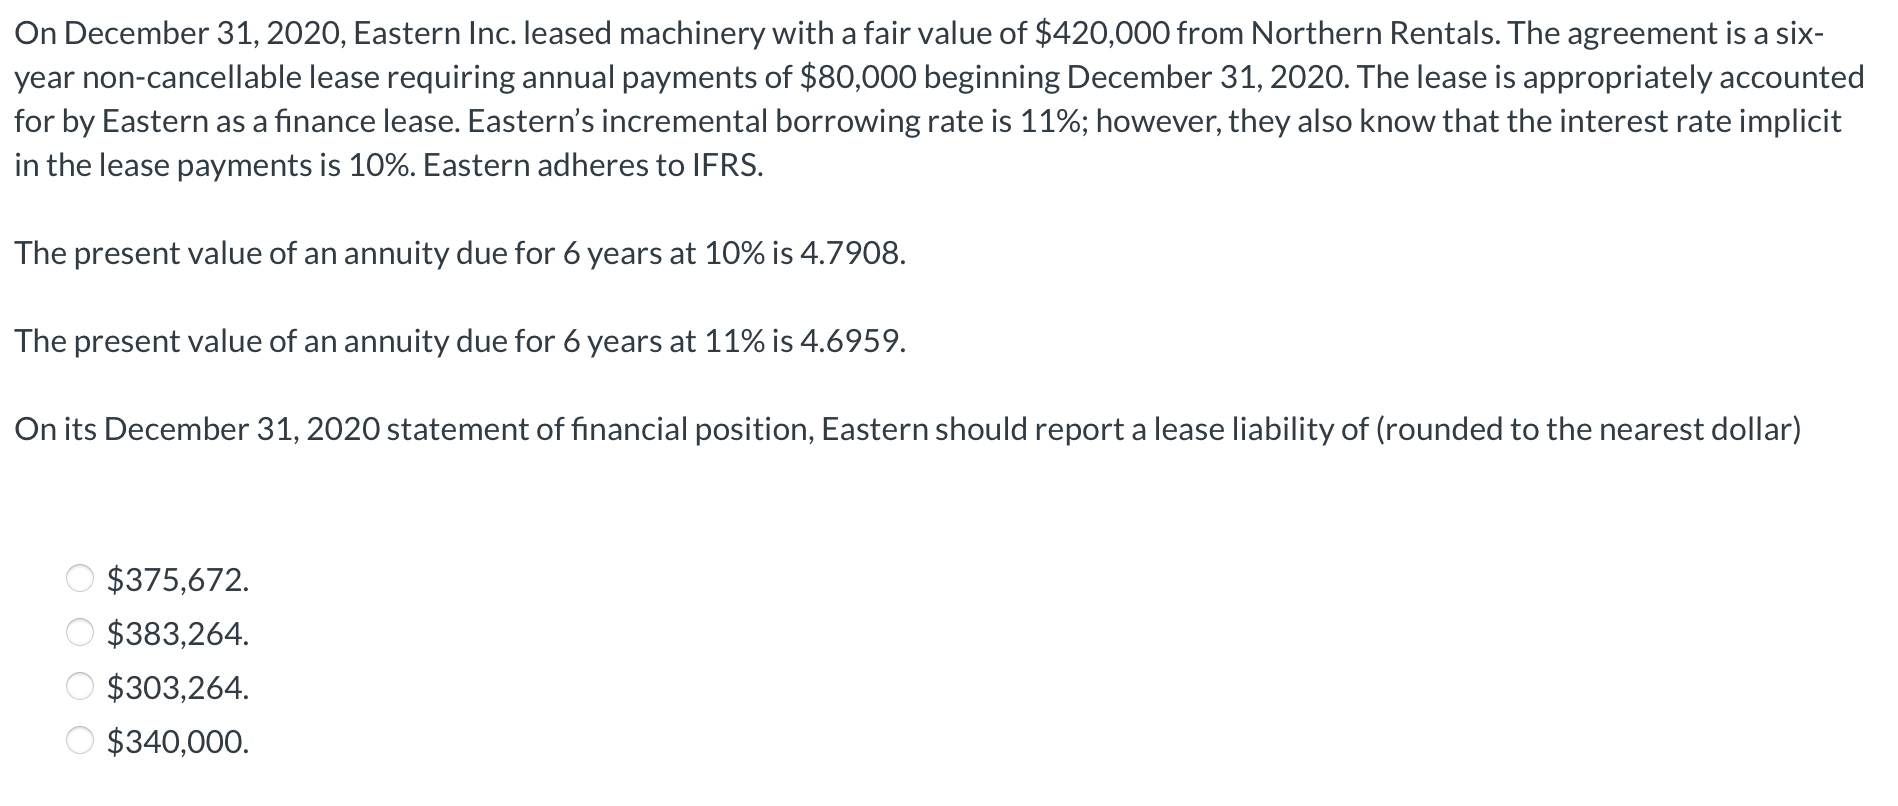 On December 31, 2020, Eastern Inc. leased machinery with a fair value of $420,000 from Northern Rentals. The agreement is a s